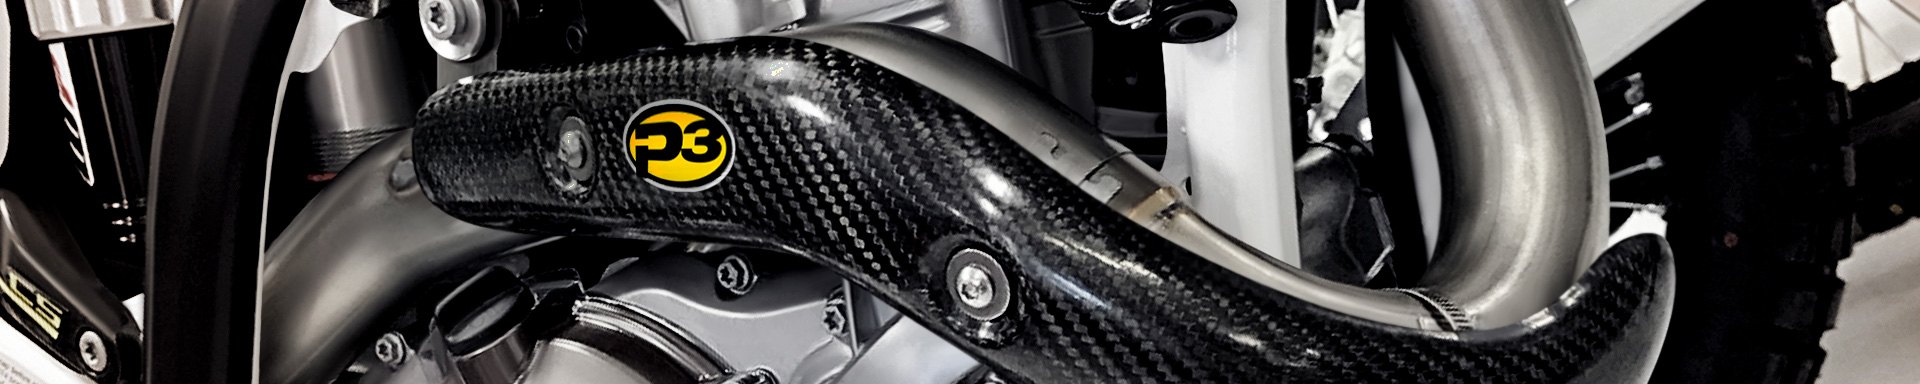 P3 Carbon Guards & Protections